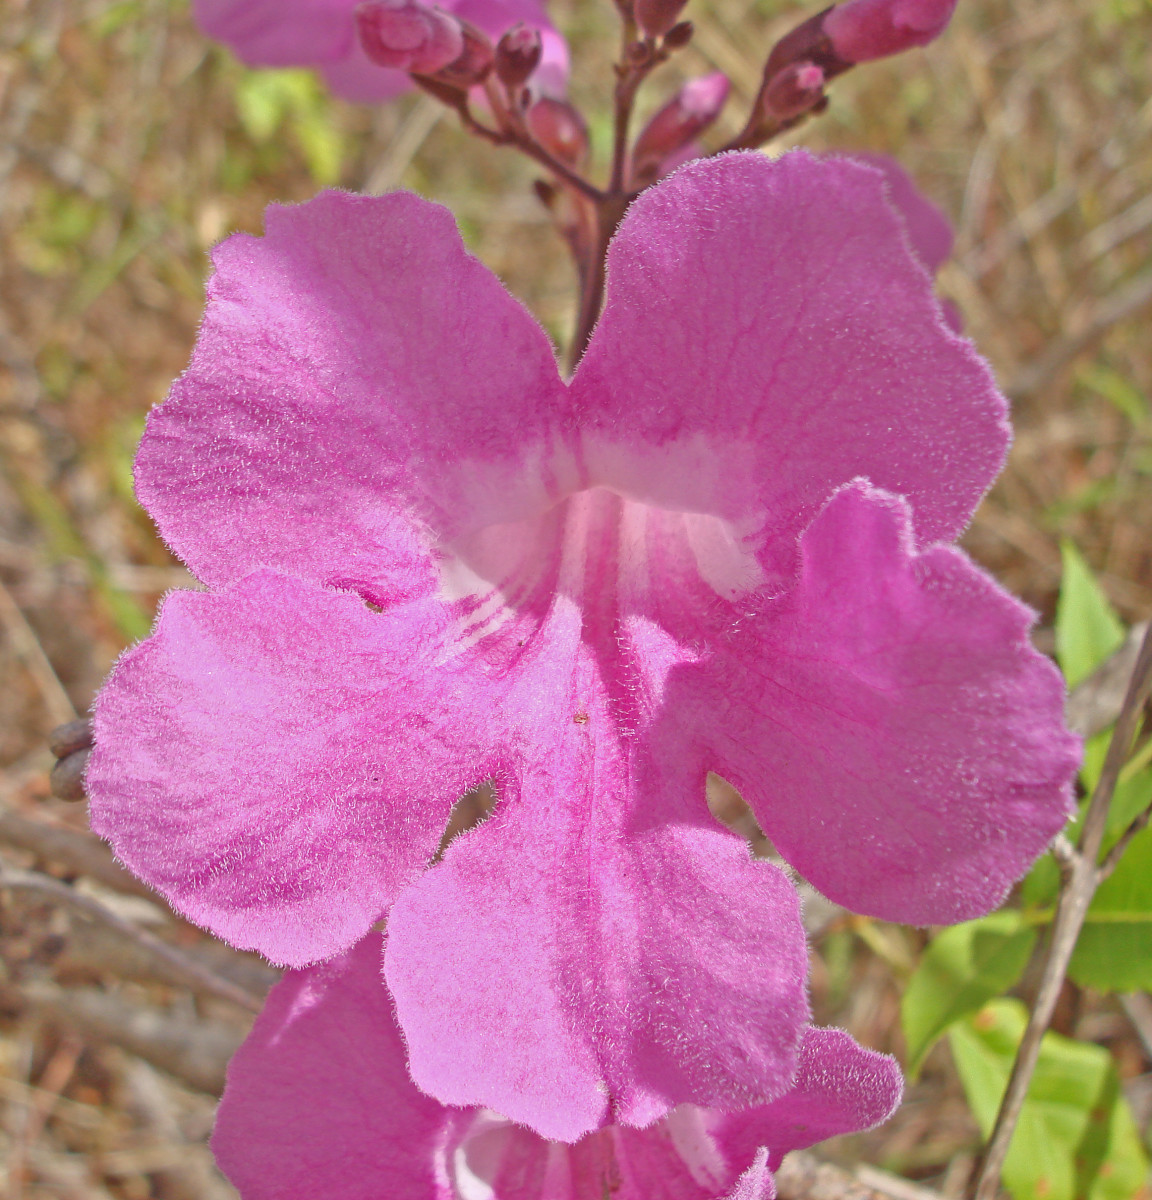 A common vine flower in the dry forest of Guanacaste during the dry season.  This was found near Nacoscolo Resort near Playa Coco.